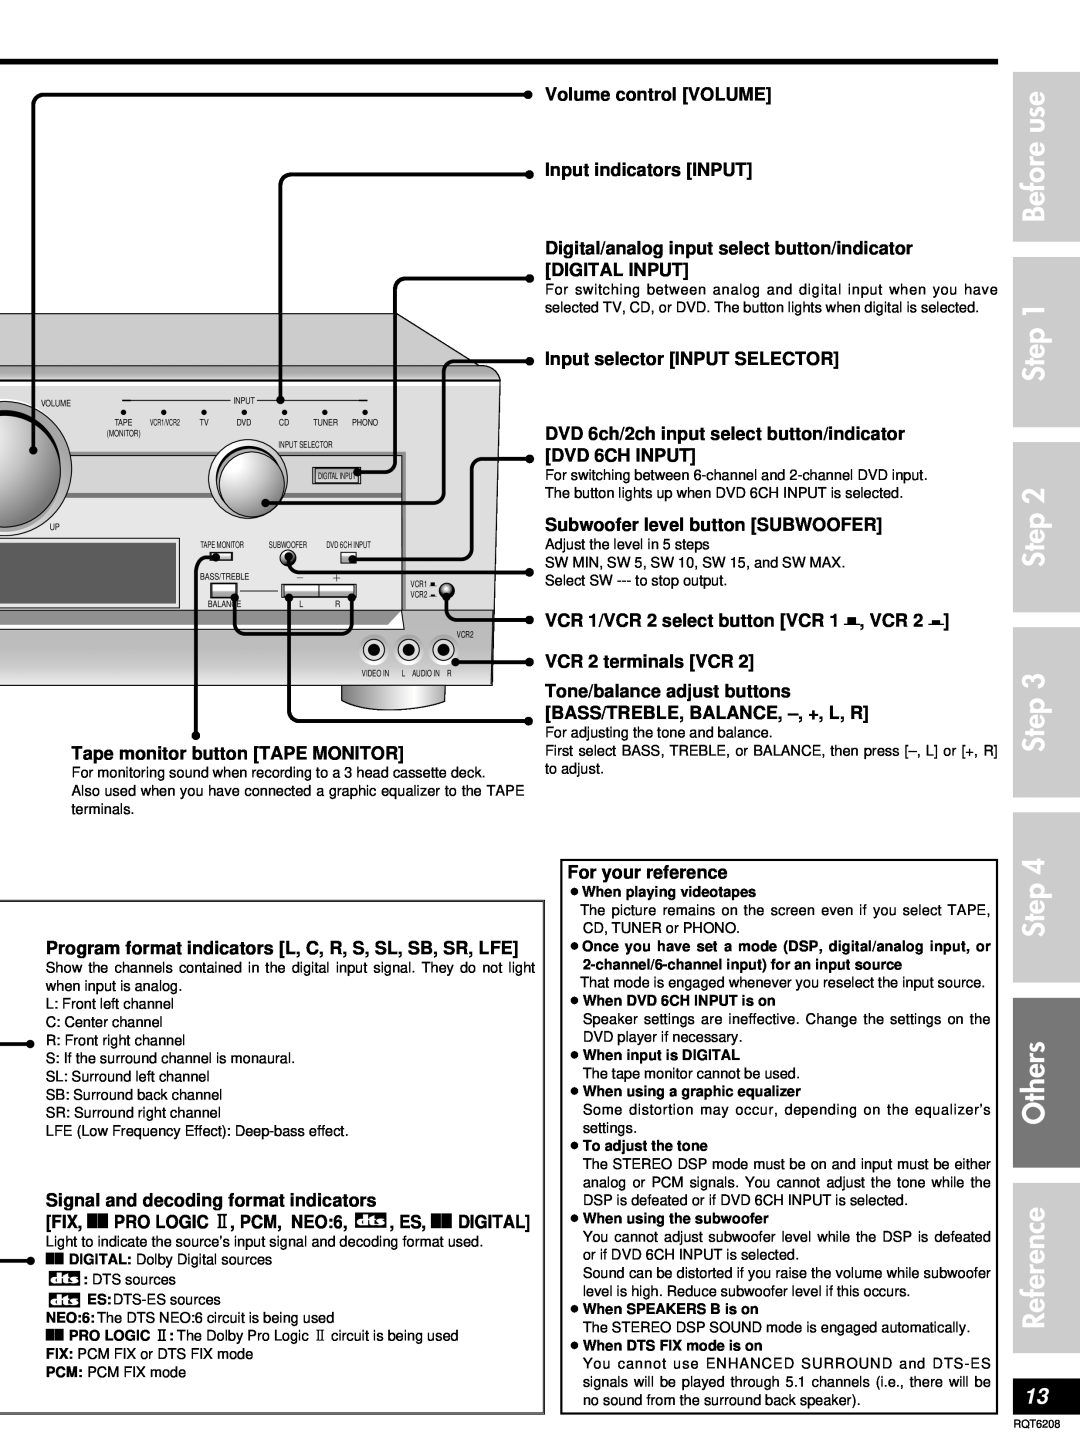 Panasonic SA-HE100 Step Others Reference, Before use Step Step, Volume control VOLUME Input indicators INPUT 